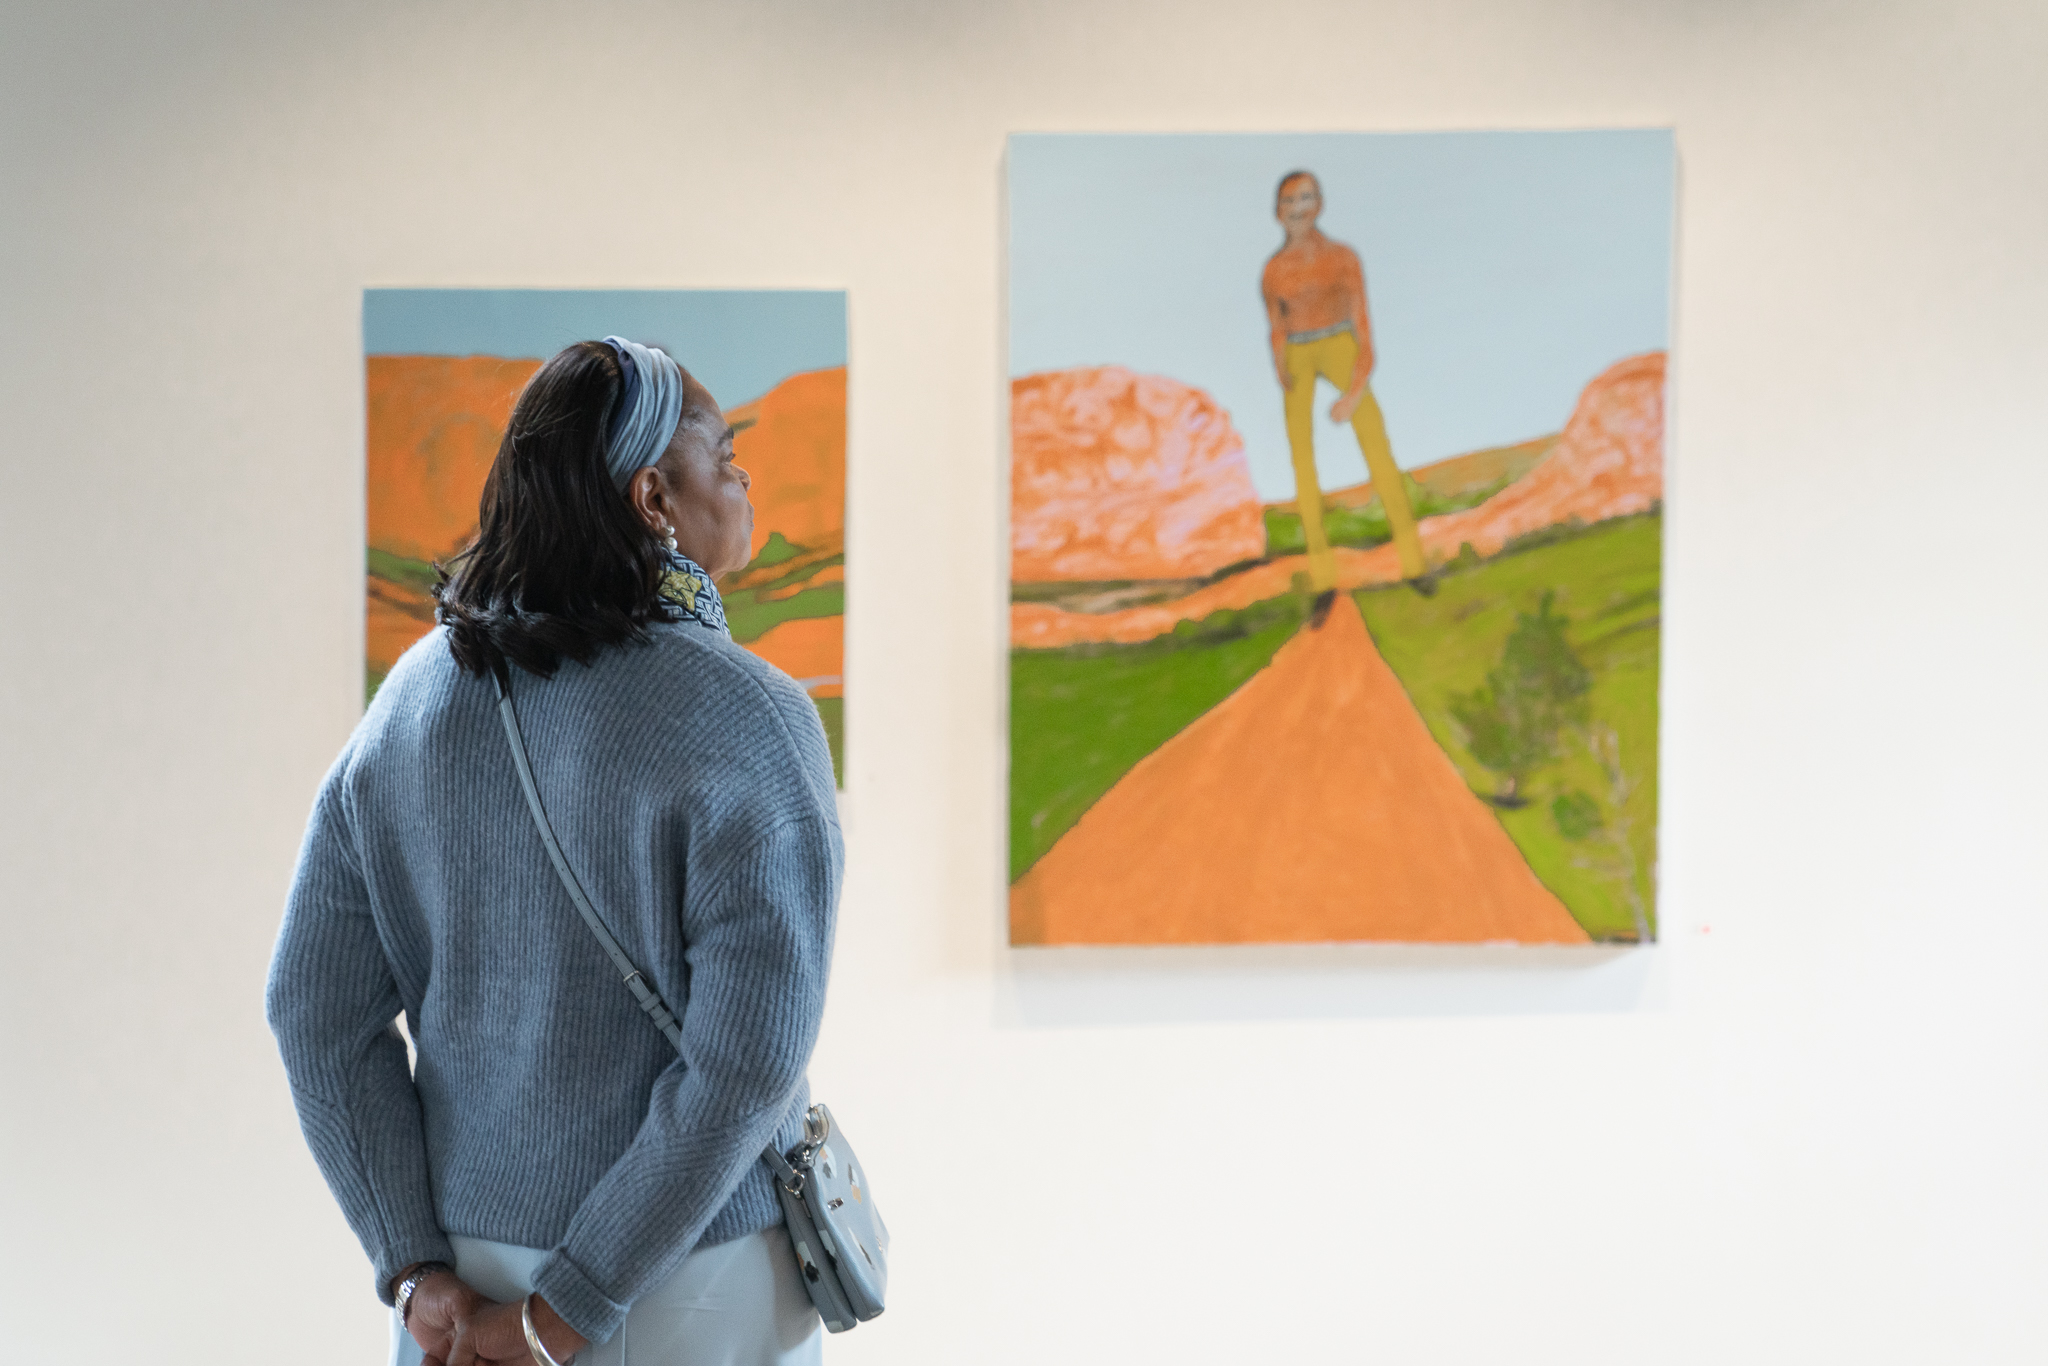 Get It Out There! ART ON THE MOVE launches five year Regional Exhibition Touring Strategy